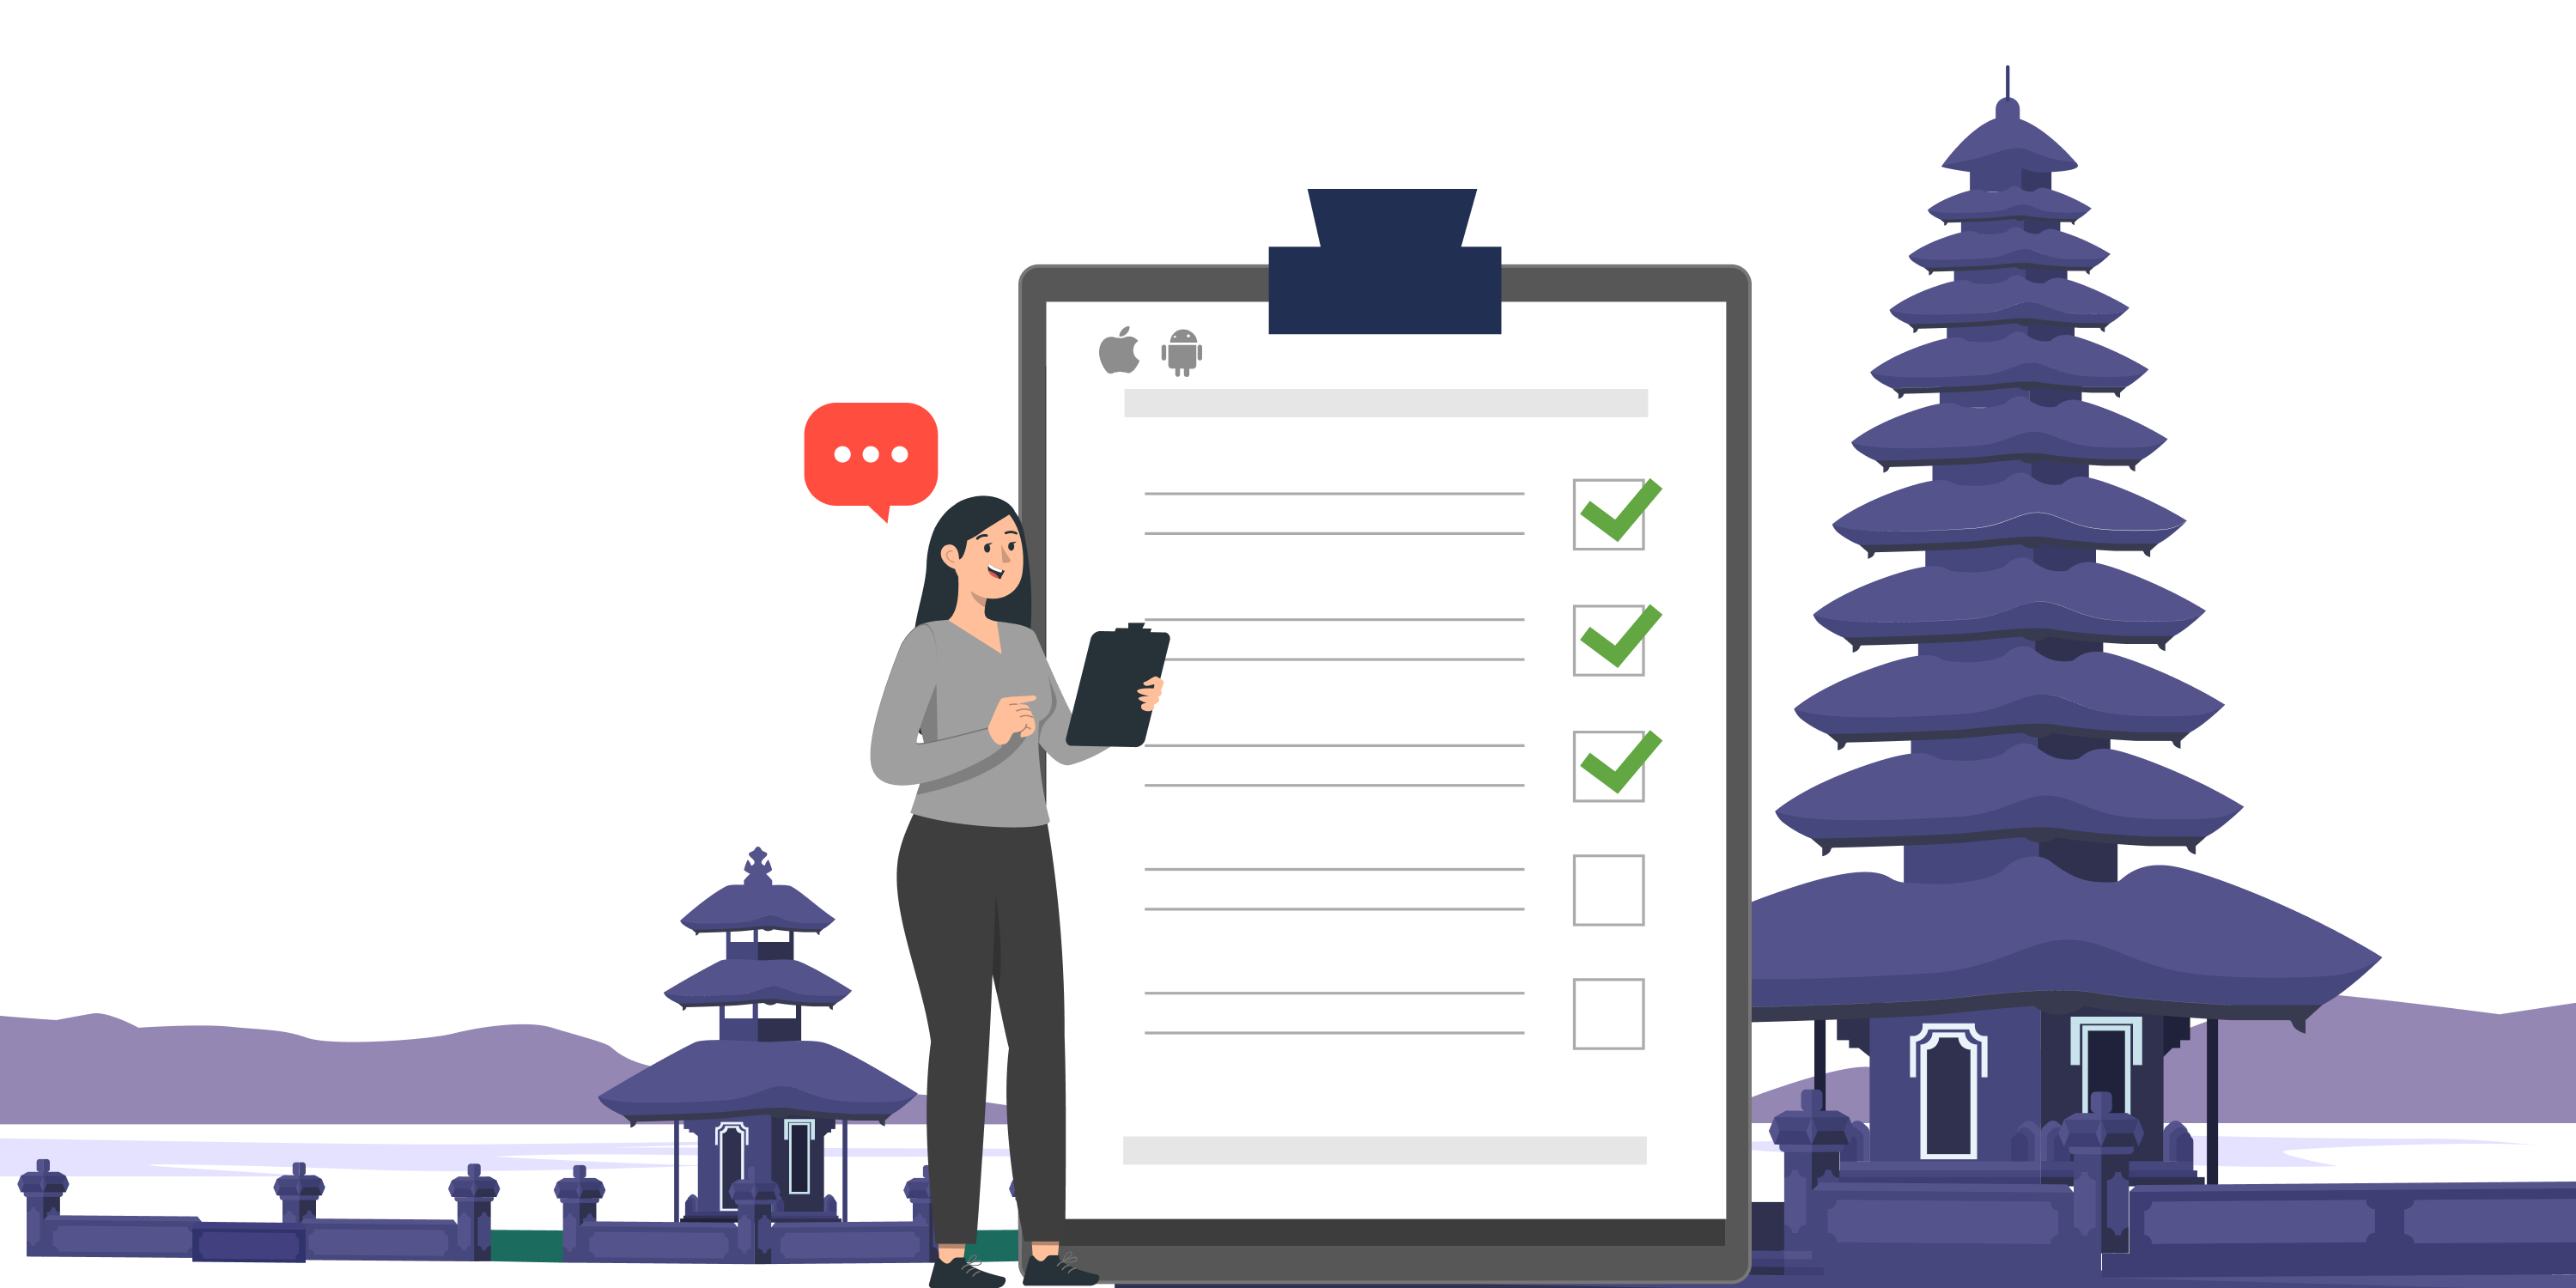 Ultimate Security Checklist to Launch a Mobile App in Indonesia - iOS & Android